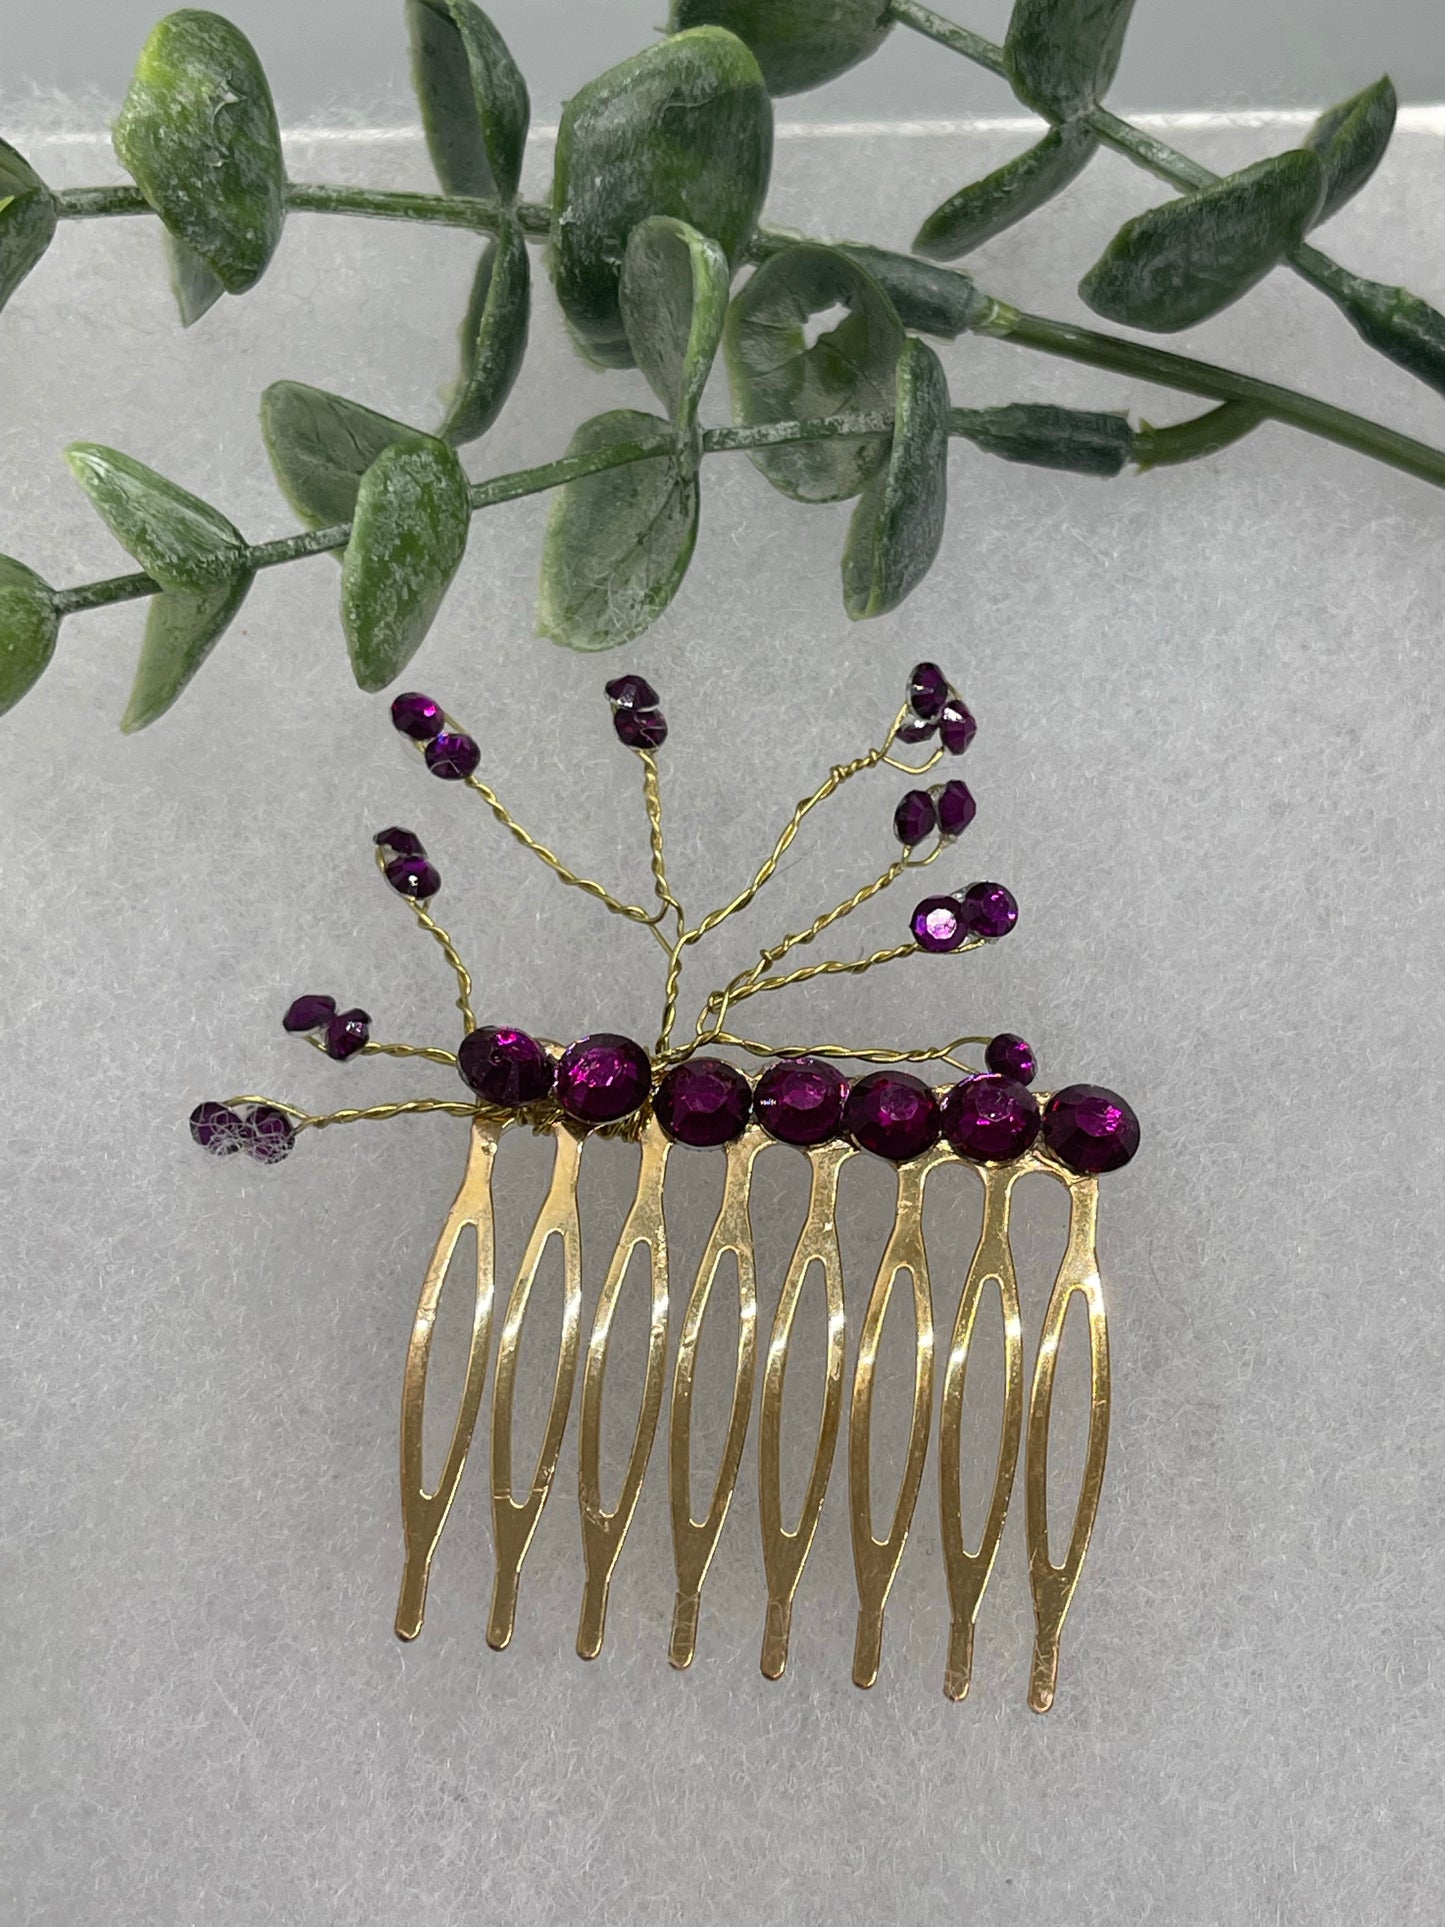 Purple crystal  2.0” gold tone bridal side Comb accents vine handmade by hairdazzzel wedding accessory bride princess gifts Shower hair accessory